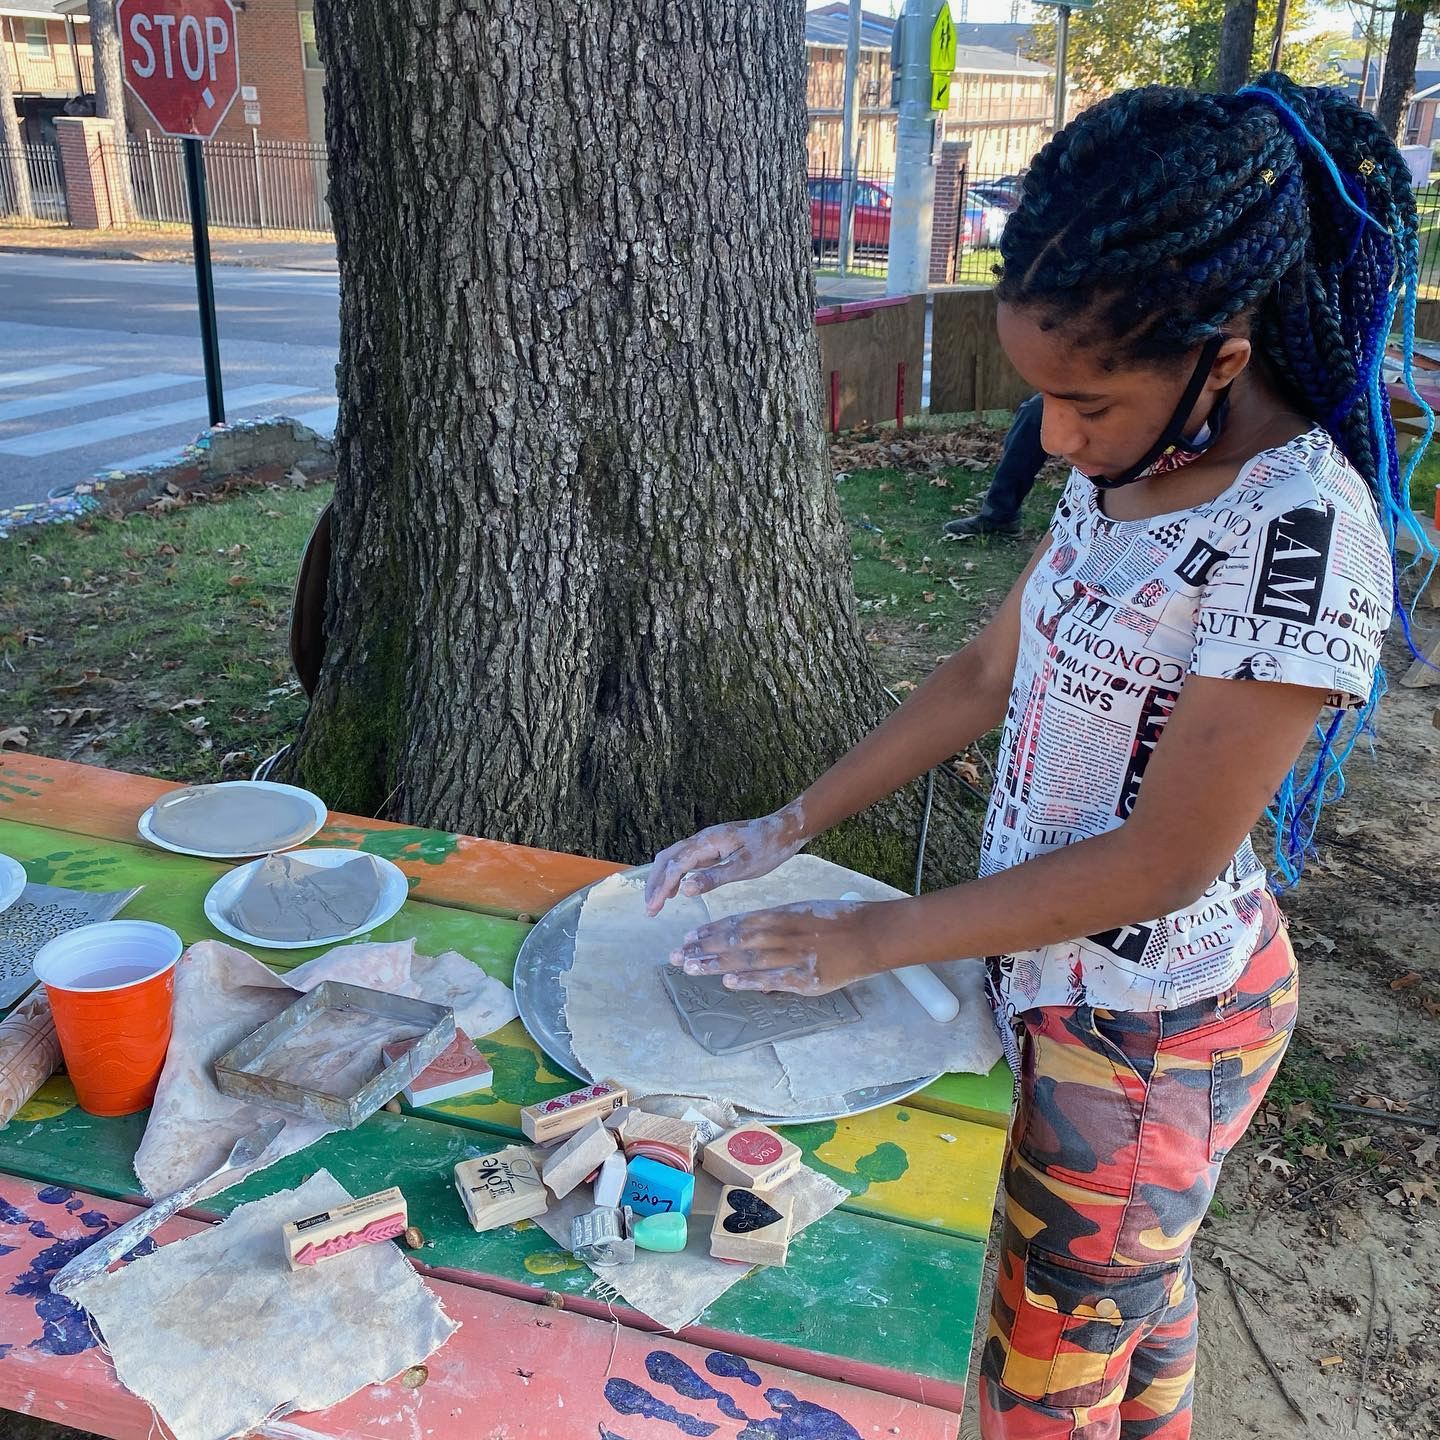 A girl with dreadlocks showcasing her pottery skills during Summer of Service.